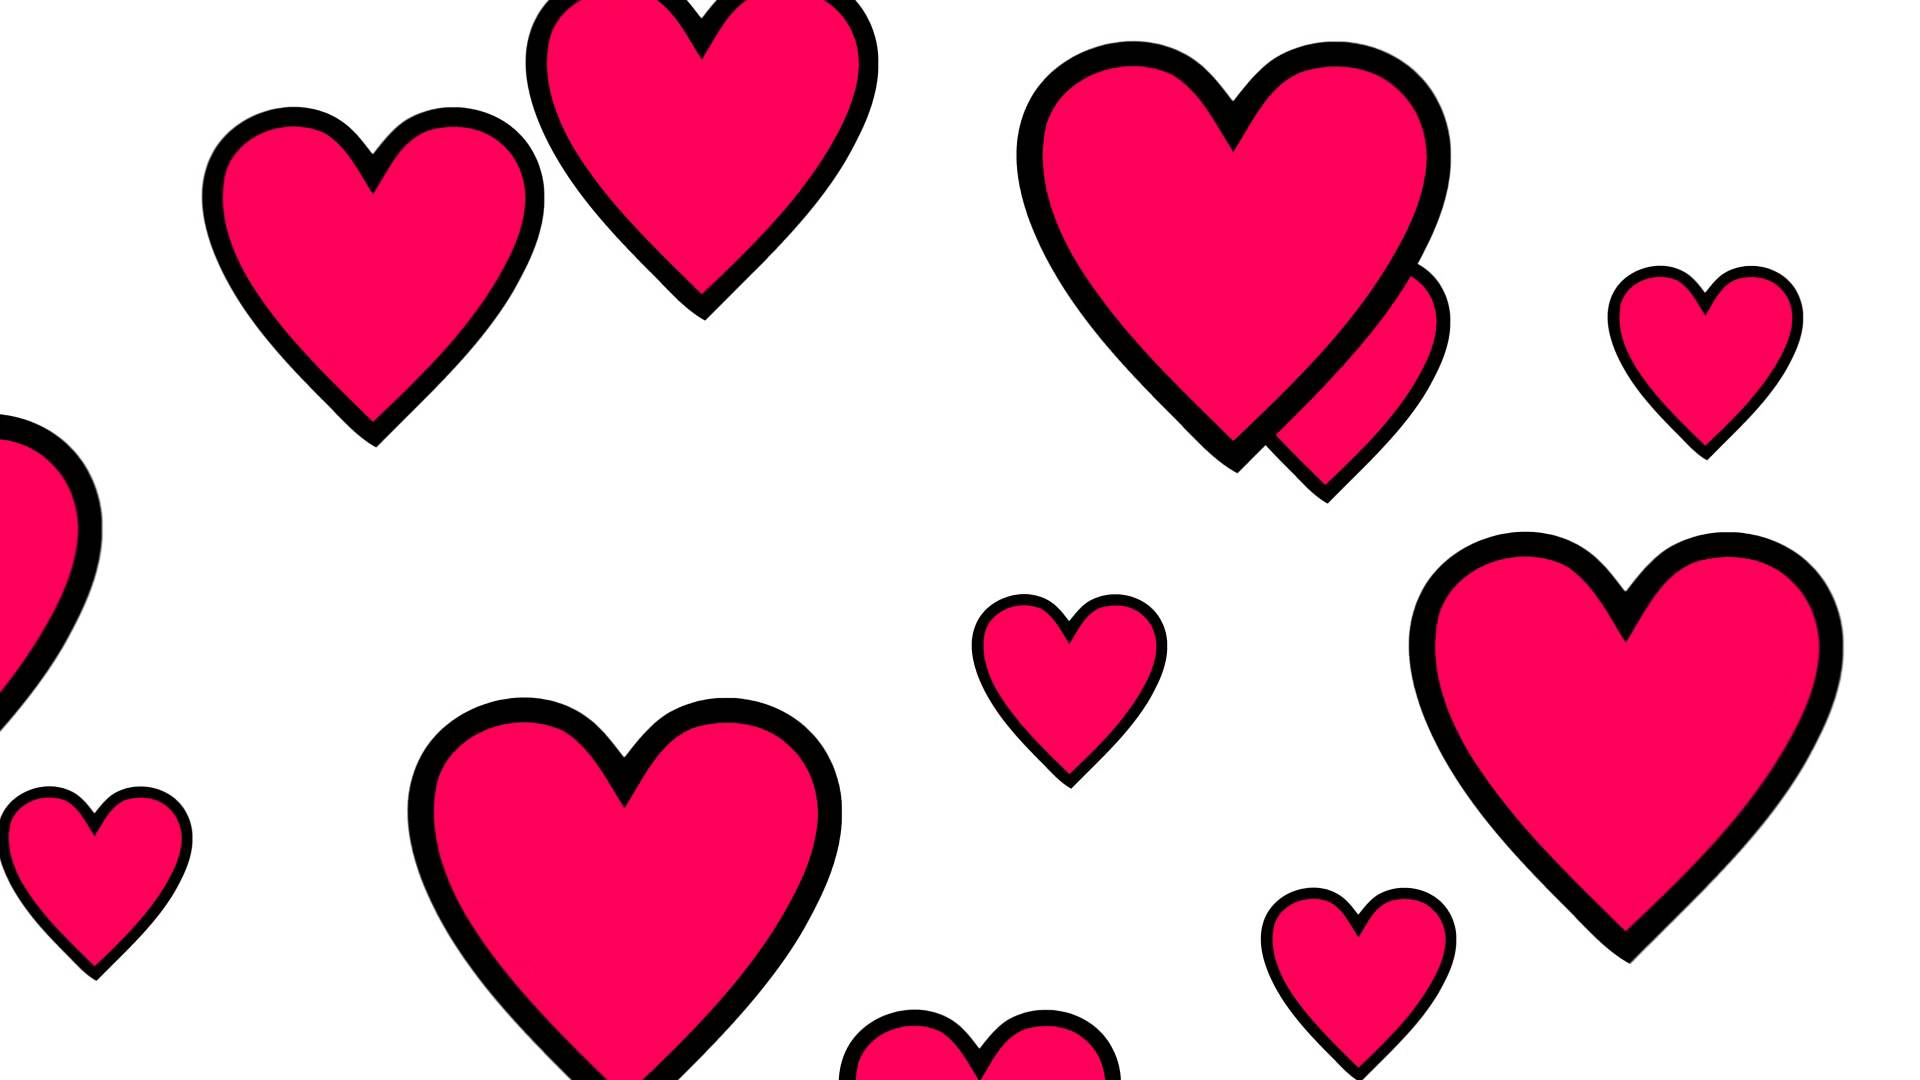 Love Hearts Image. Free download best Love Hearts Image